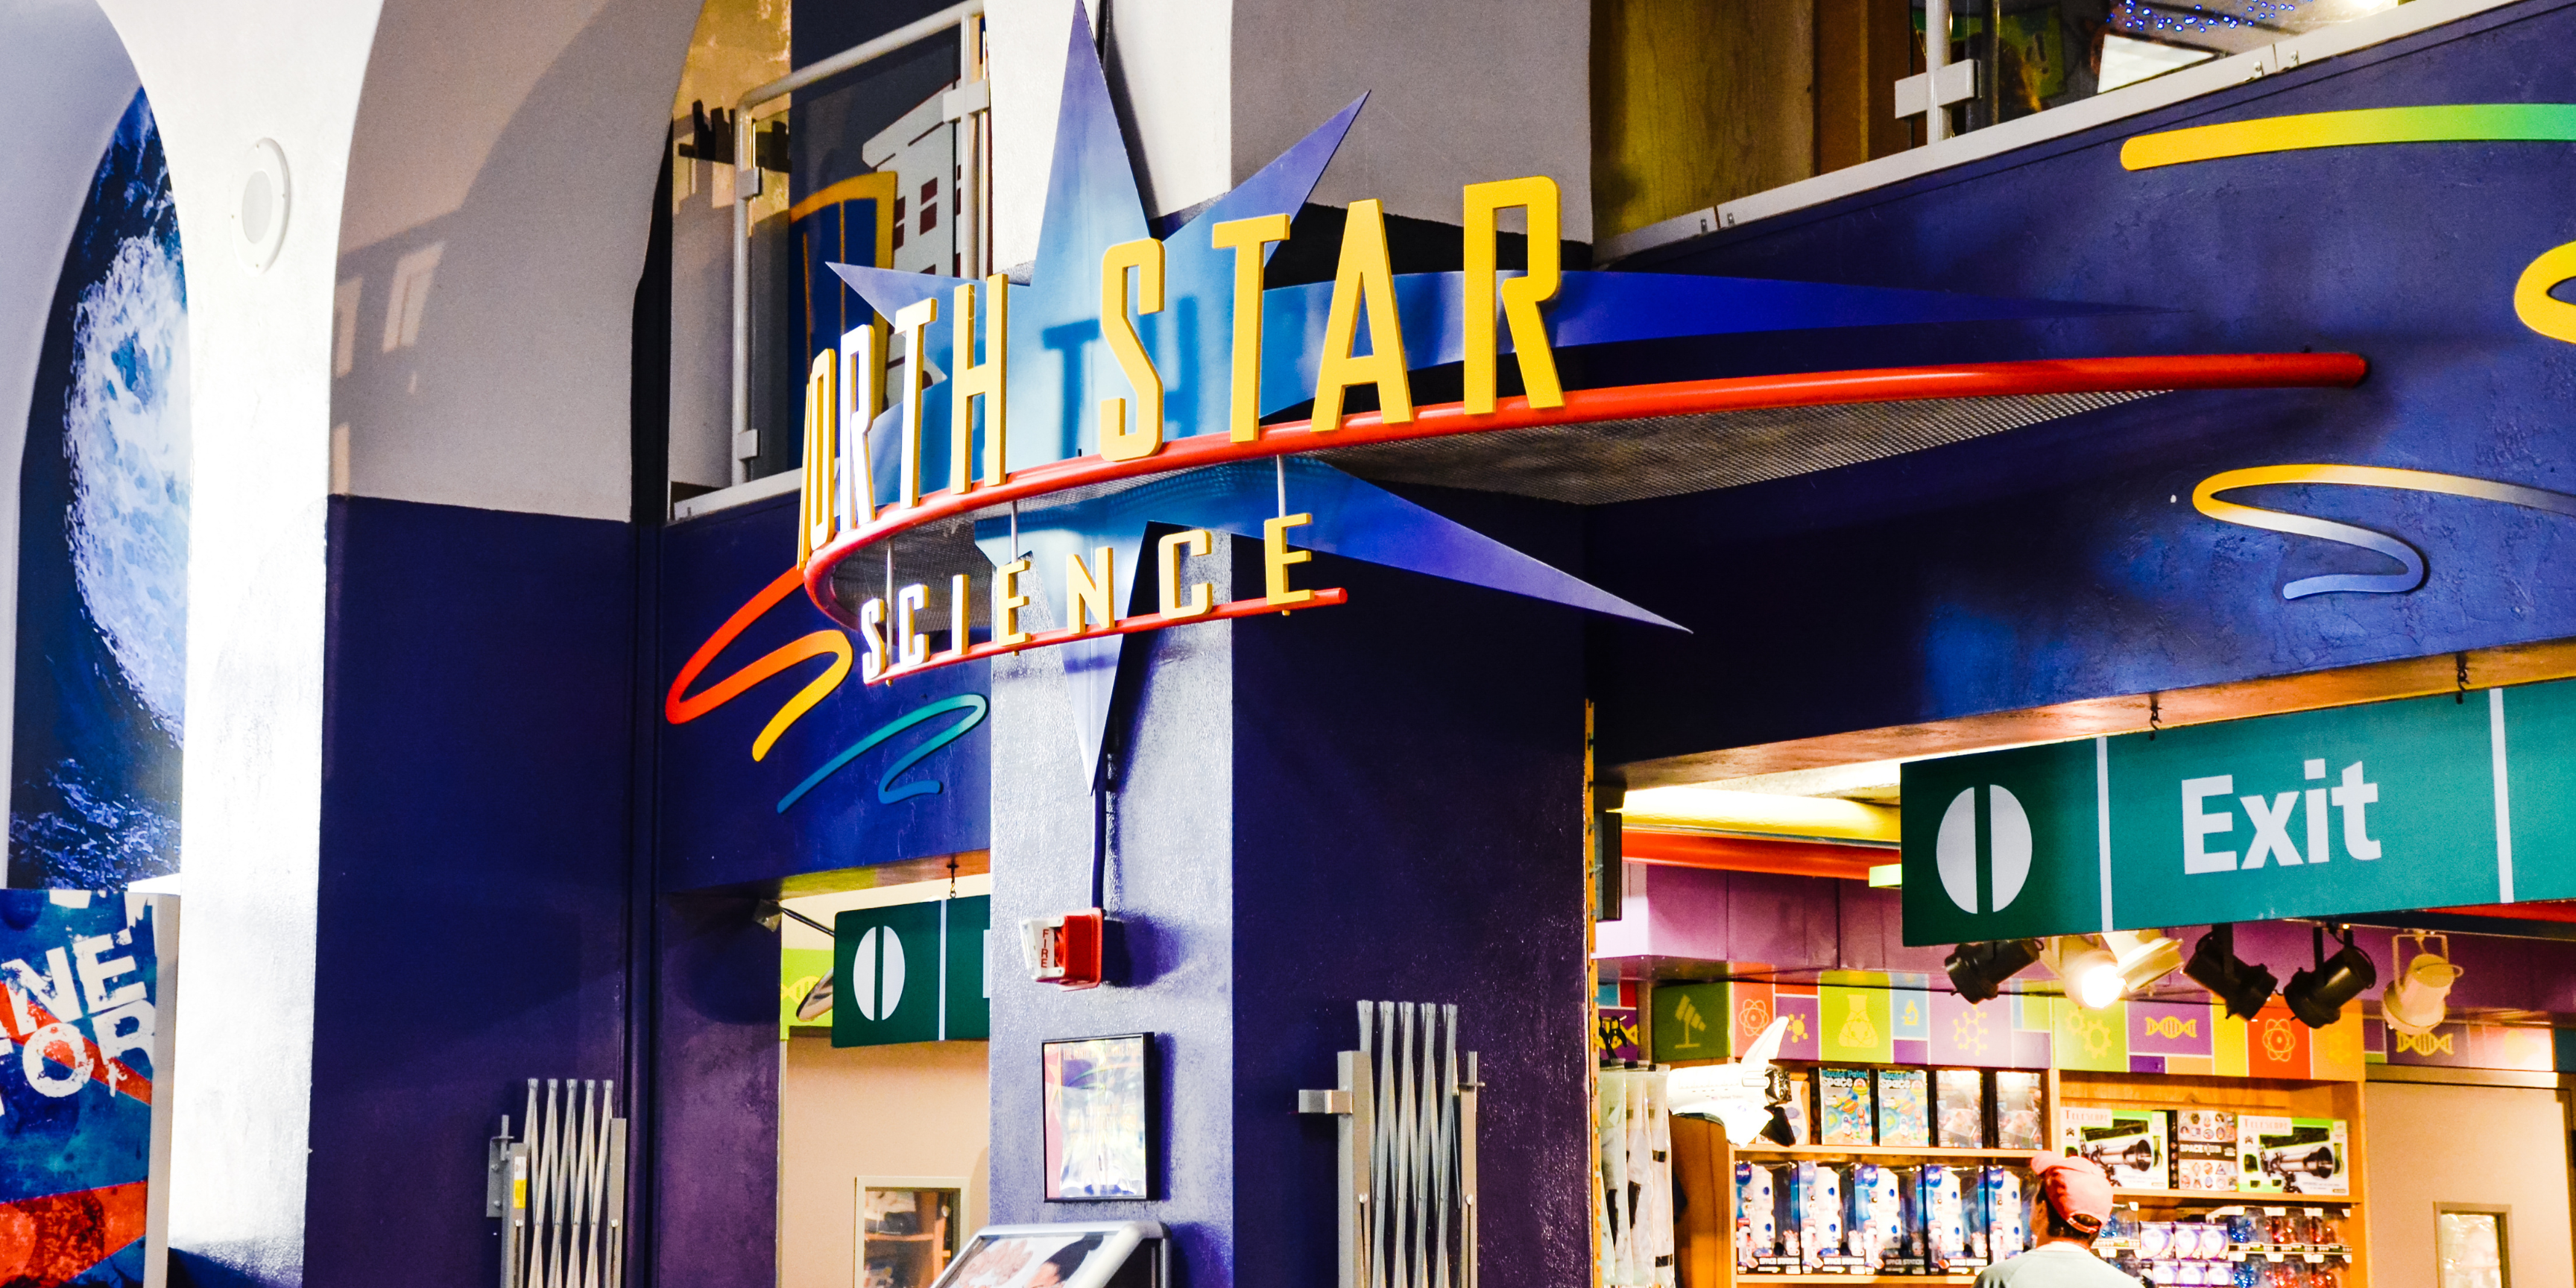 Photo of the North Star Science Store front entrance with the sign that says "North Star Science."